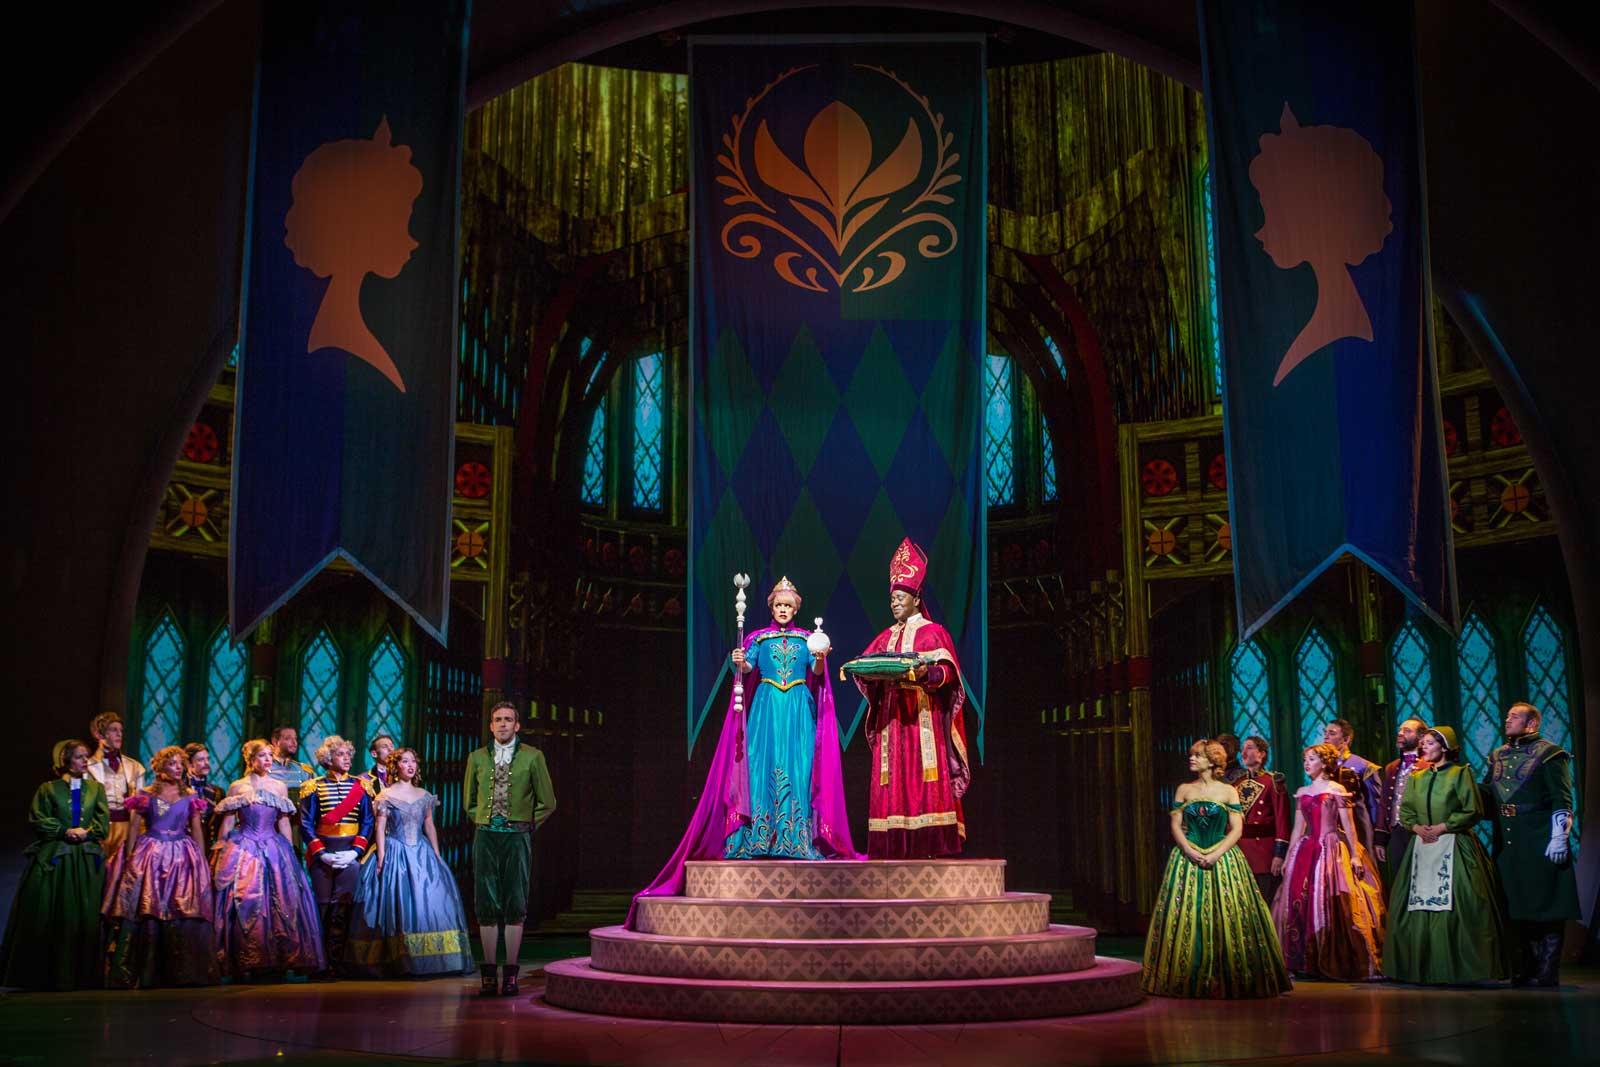 ELSA'S CORONATION IN 'FROZEN - LIVE AT THE HYPERION' -- A new theatrical interpretation for the stage based on Disney's animated blockbuster film, Frozen is now playing at the Hyperion Theater at Disney California Adventure Park. The show immerses audiences in the emotional journey of Anna and Elsa with all of the excitement of live theater, including elaborate costumes and sets, stunning special effects and show-stopping production numbers. (Piotr A. Redlinski/Disneyland Resort)